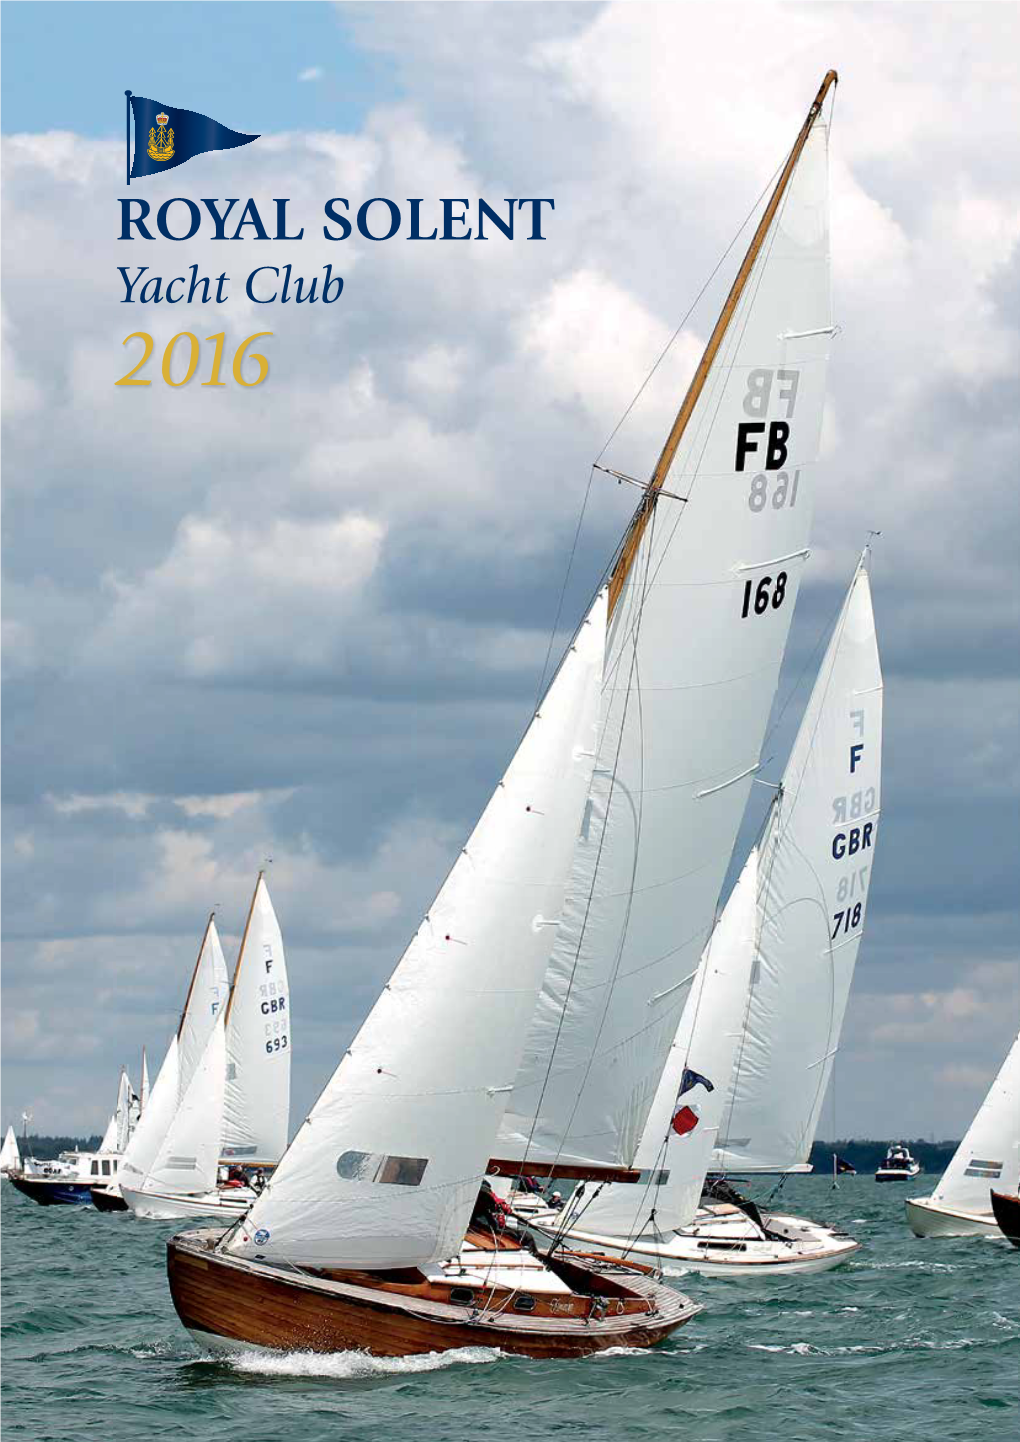 ROYAL SOLENT Yacht Club 2016 the Personal Investment Service at Charles Stanley We Have a Different Approach to Investment Services